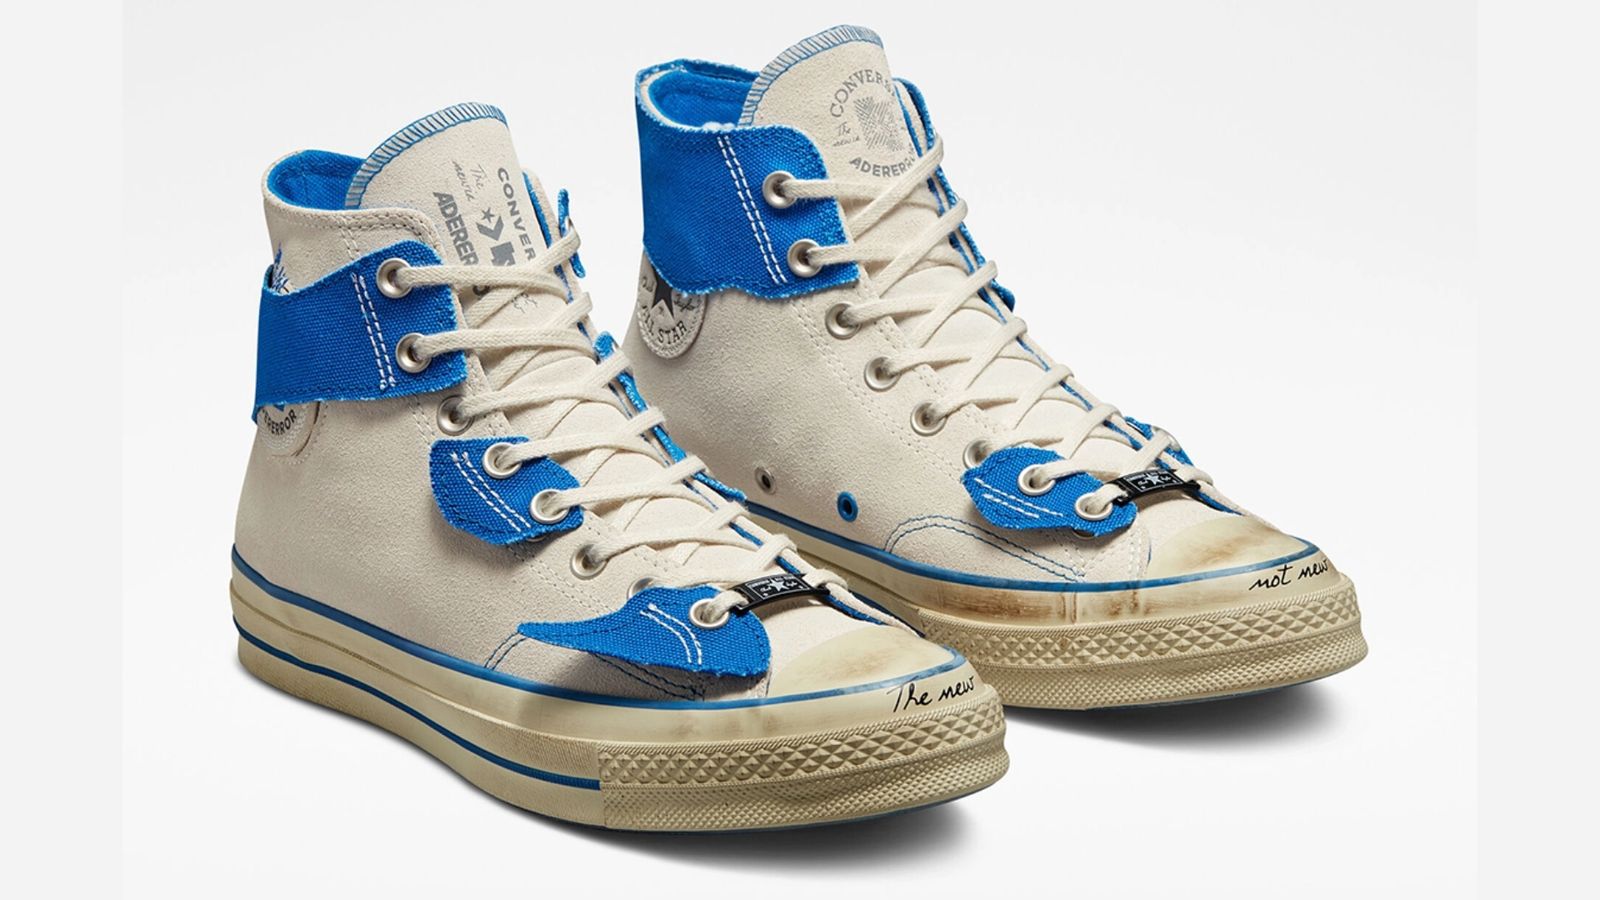 ADER error x Converse Chuck 70 Hi "The New Is Not New" product image of a white pair of sneakers with ripped blue overlays.